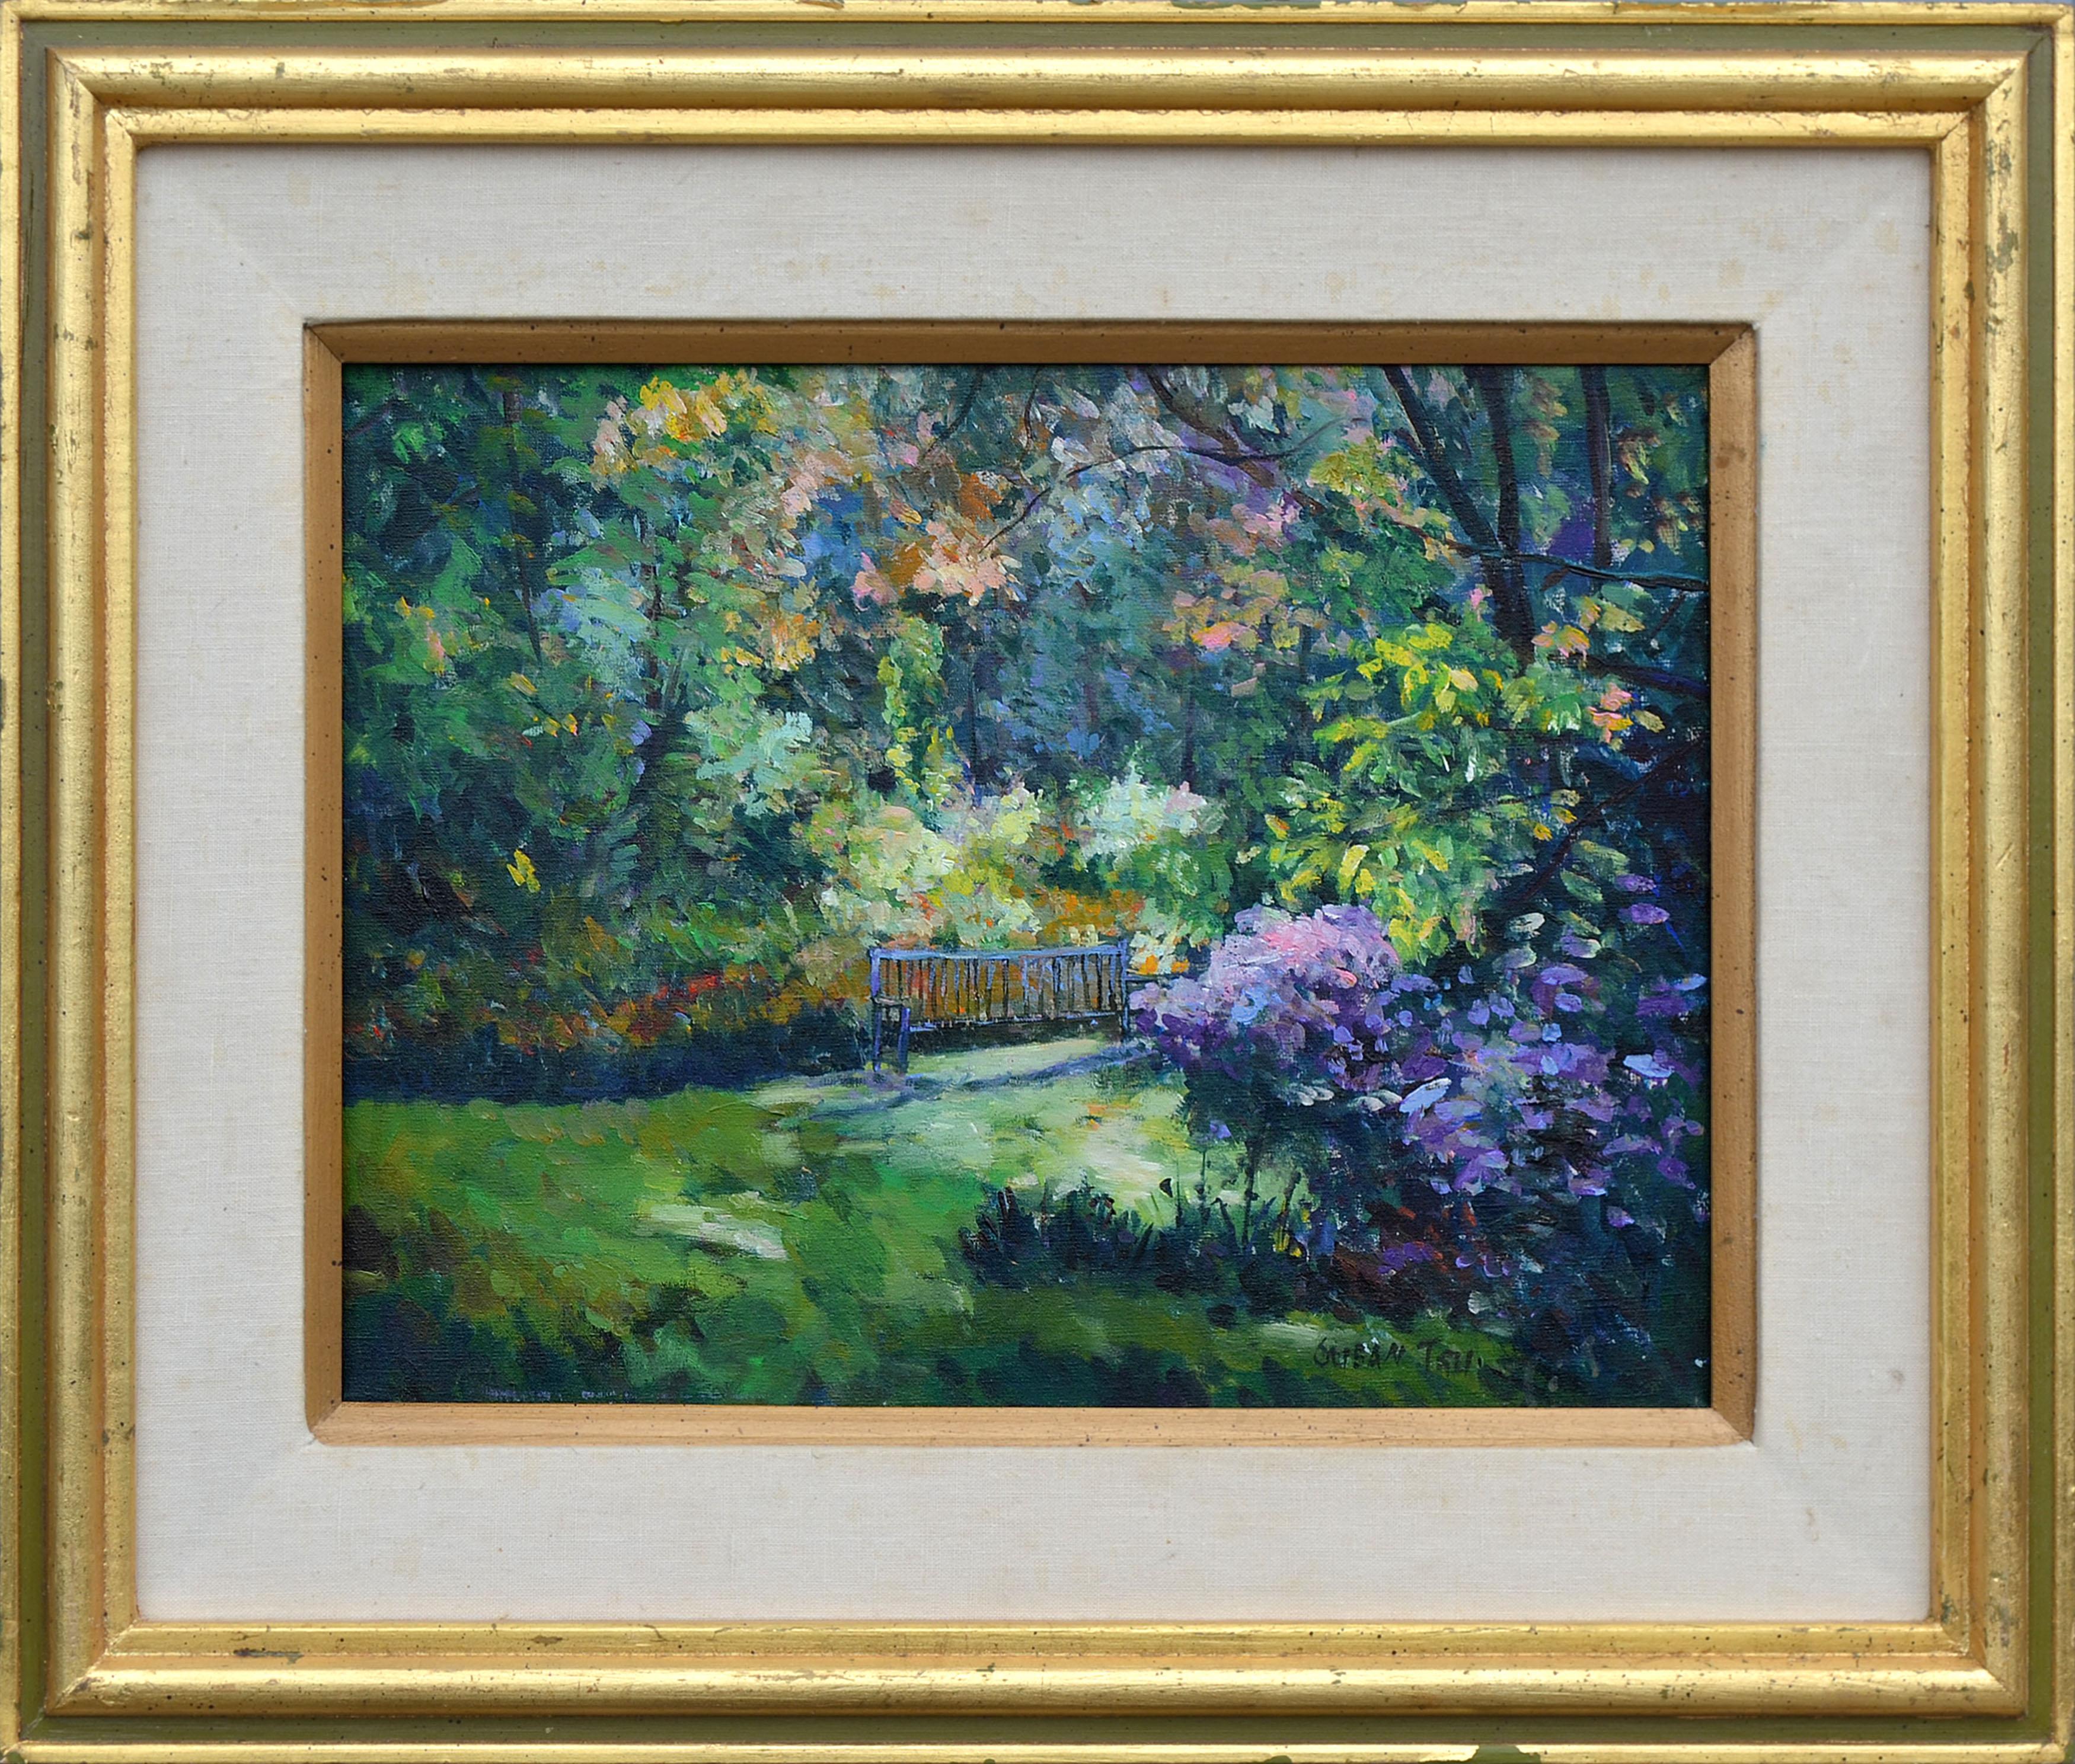 Susan F. Tsu Landscape Painting - Bench in the Spring Forest Landscape